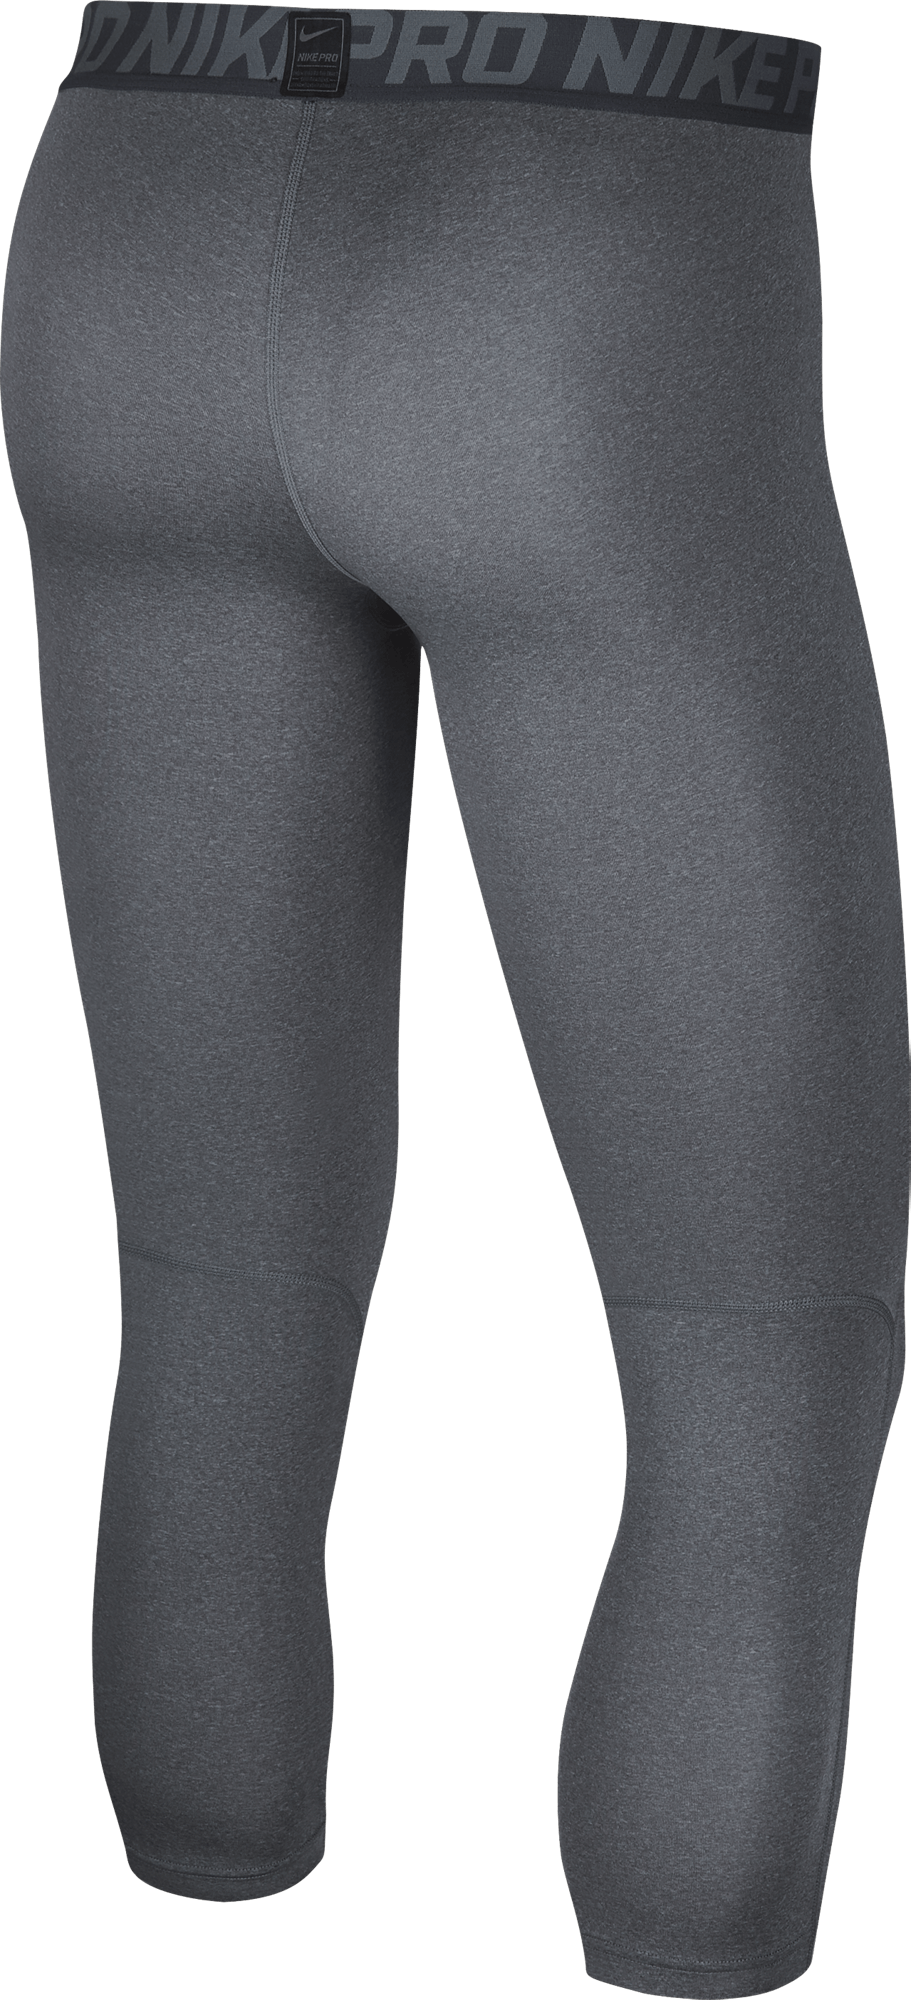 Pro Tights Carbon